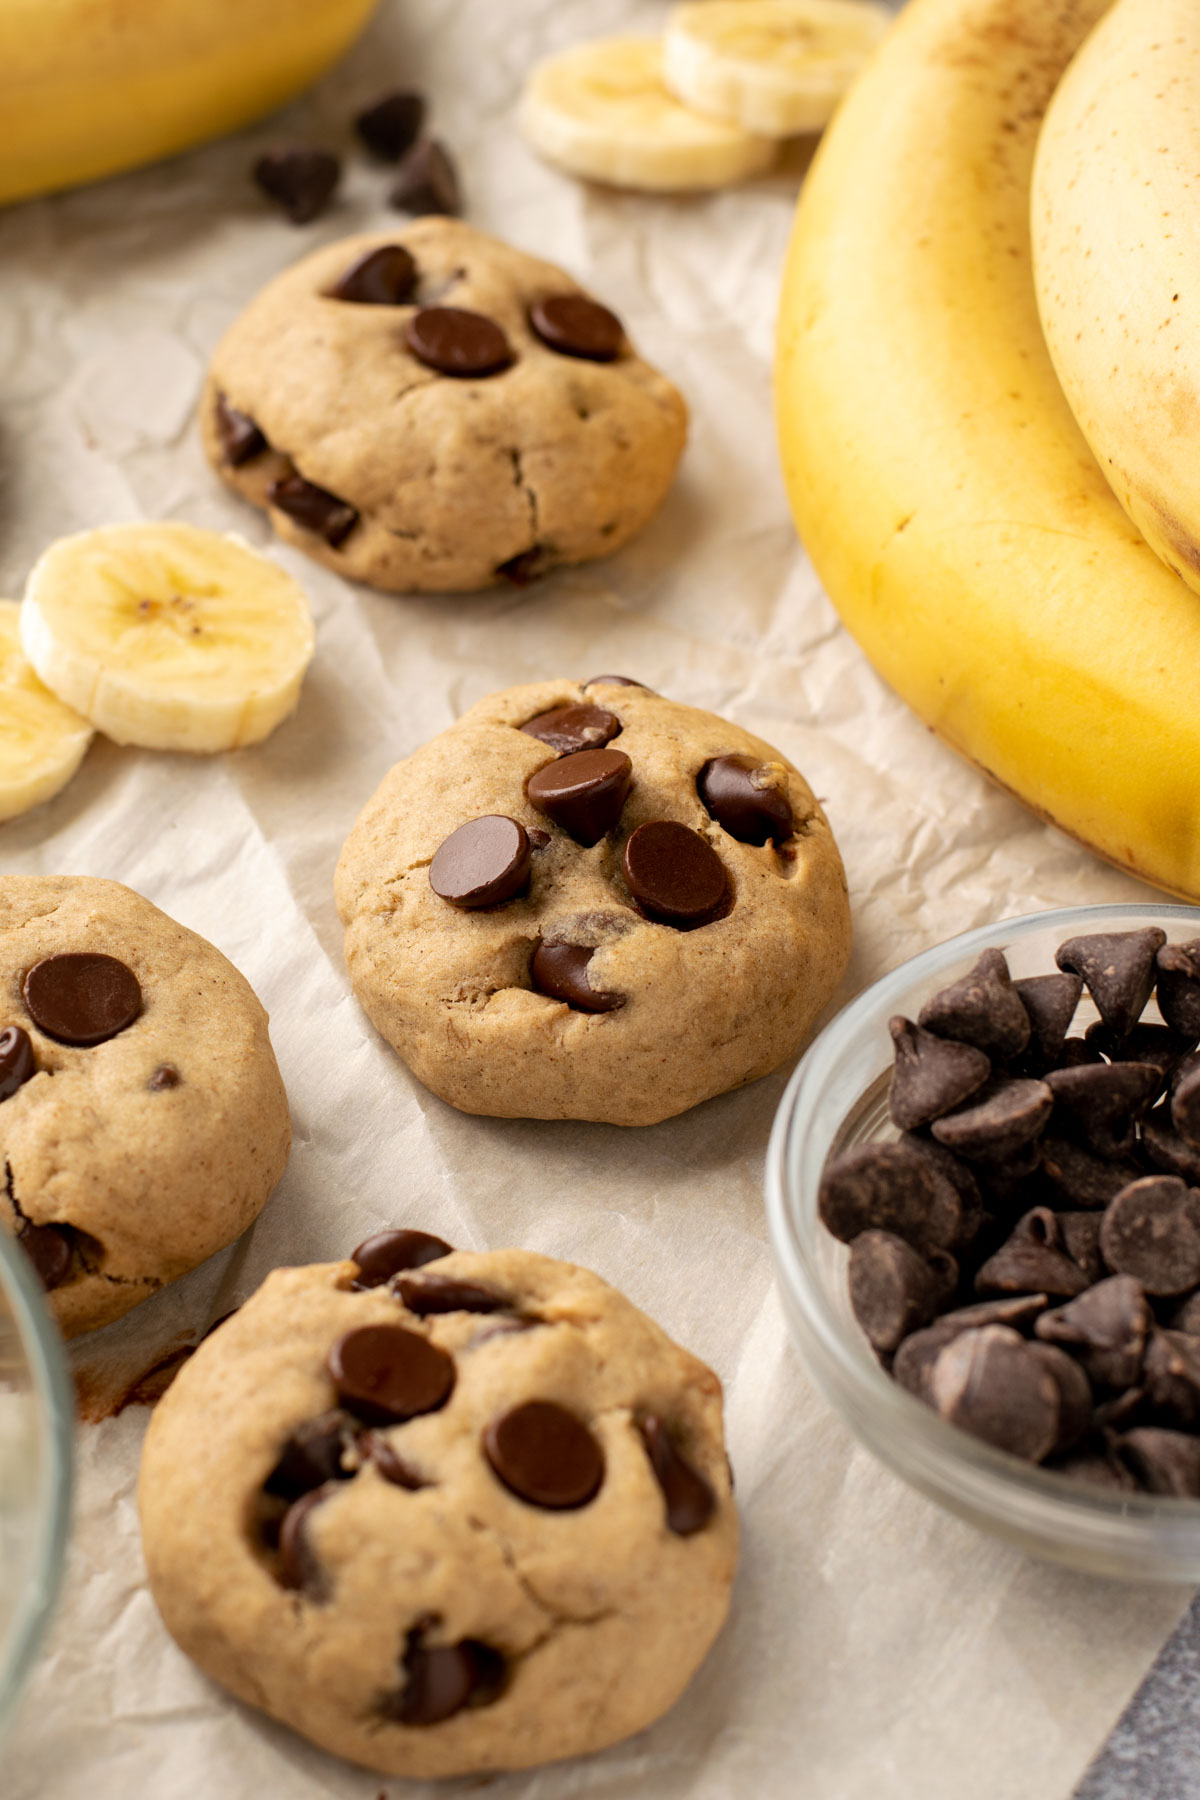 chocolate chip cookies with banana slices and chocolate chips around